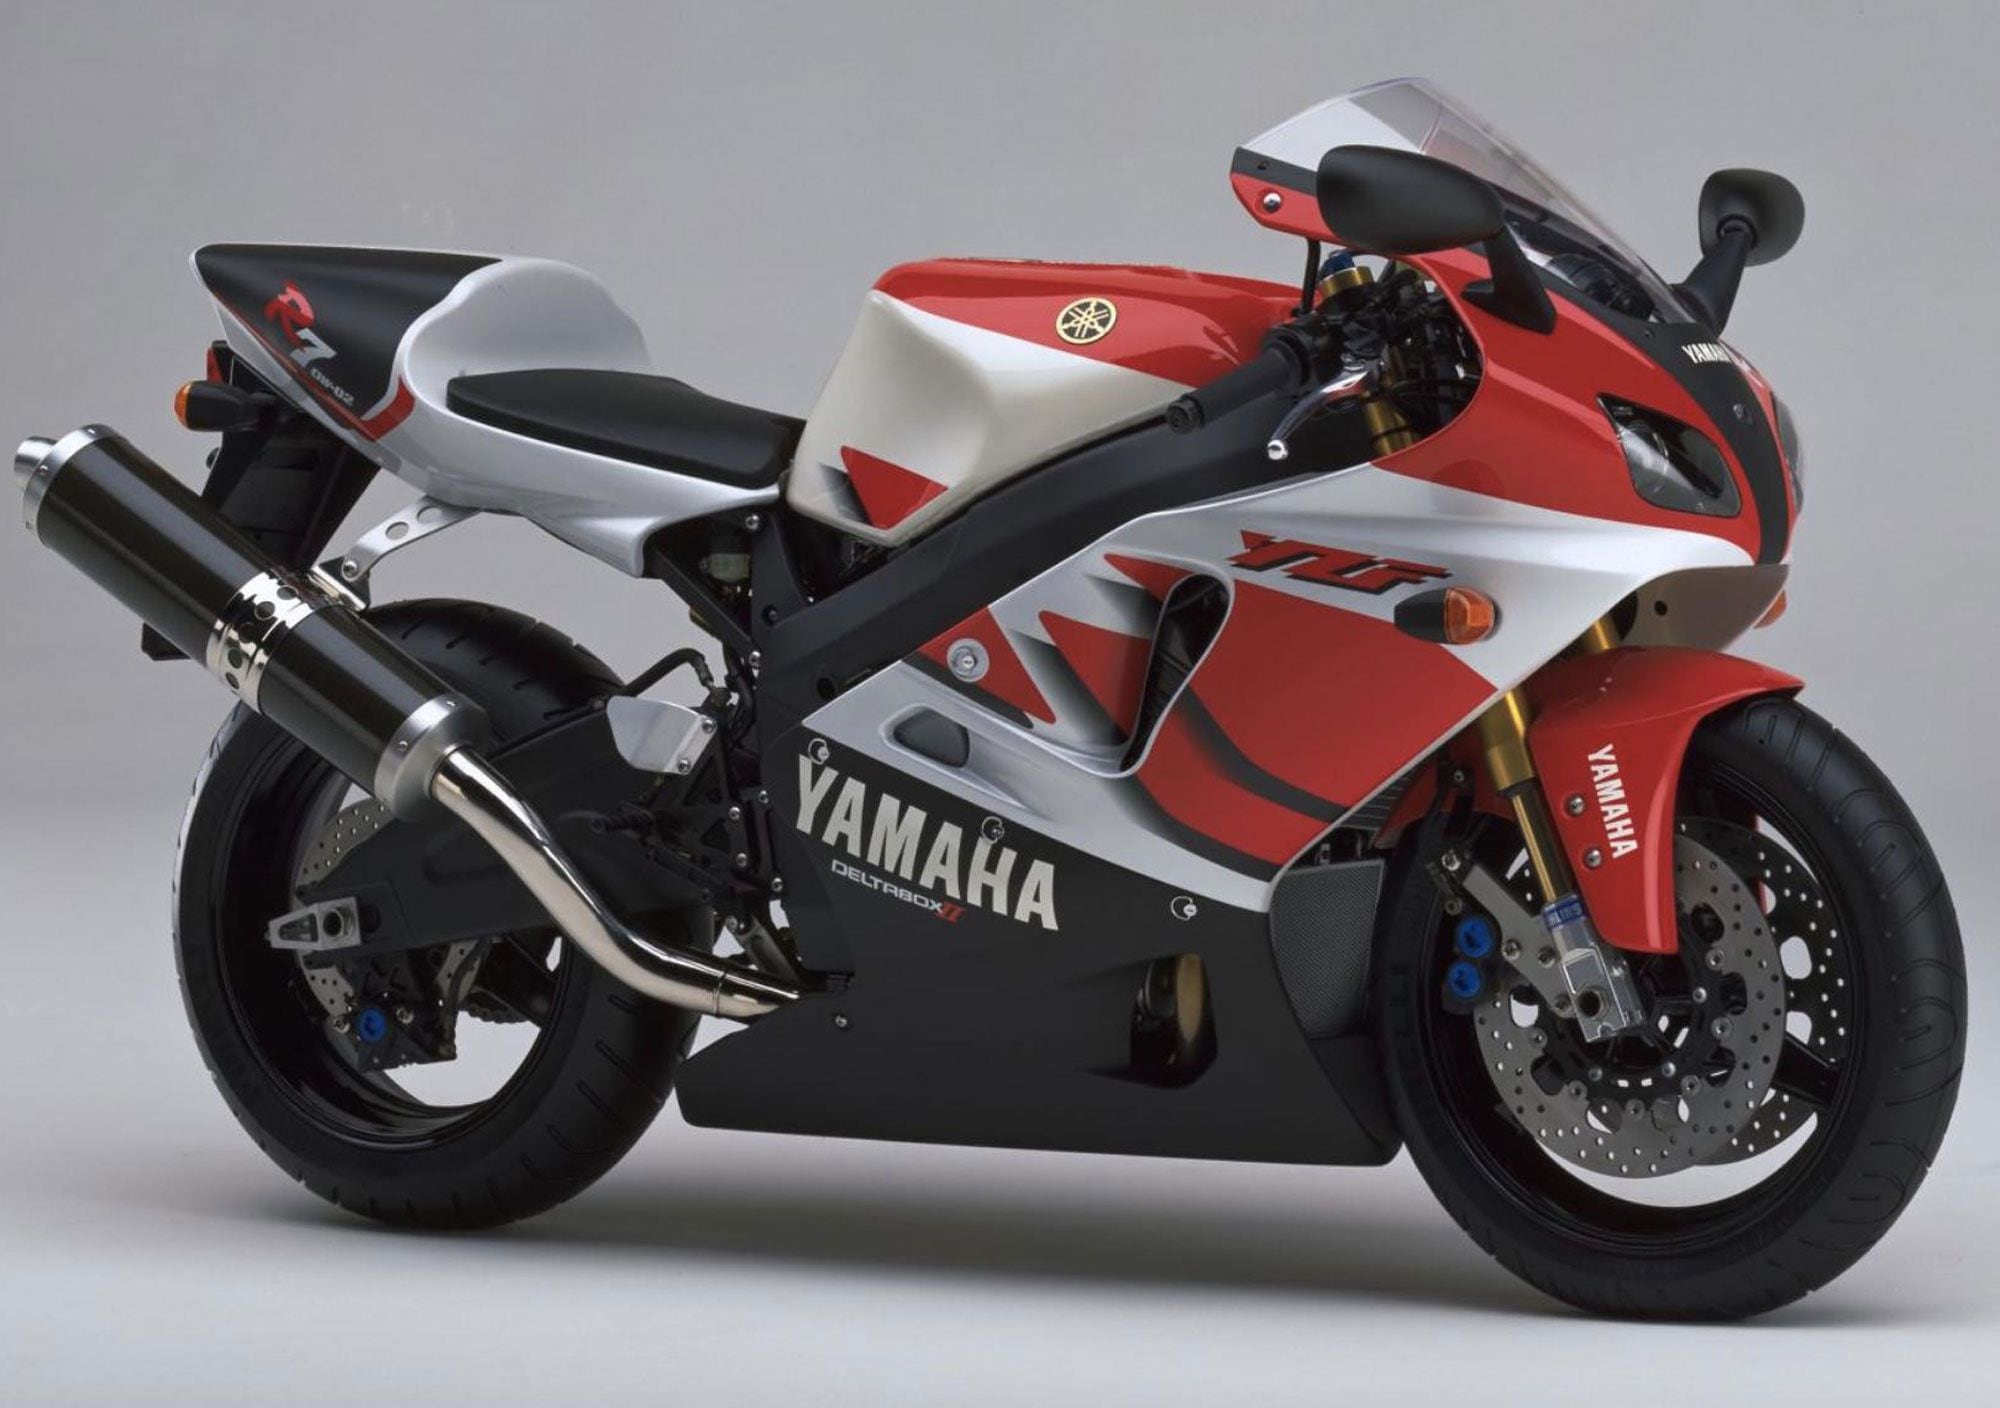 The original YZF-R7 from 1999 packed a 749cc four-cylinder mill, so the new bike should be substantially tamer—and less expensive.